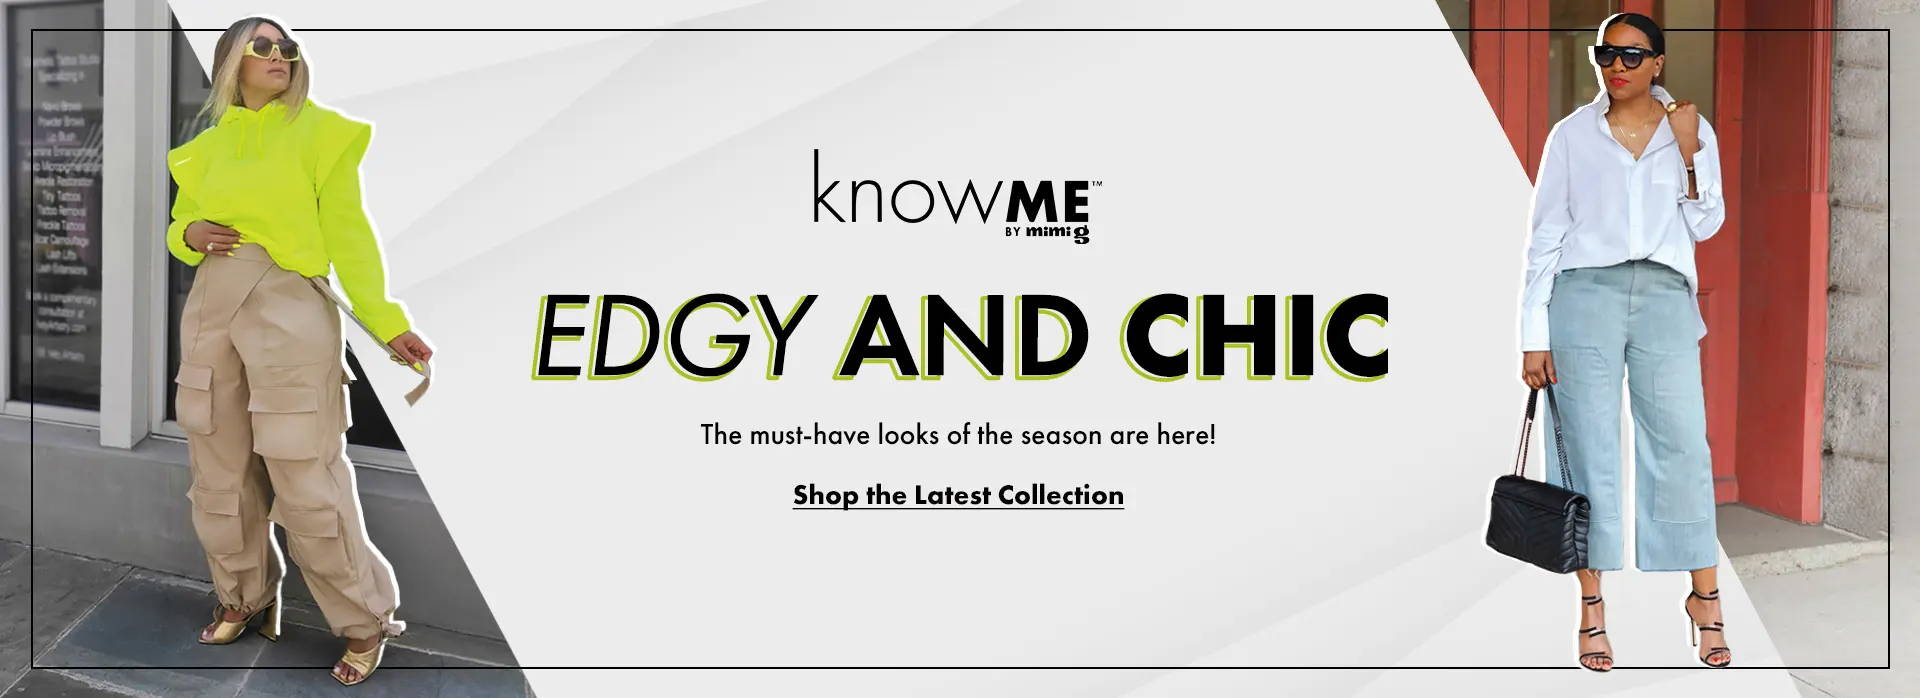 Edgy and Chic, The must-have looks of the season are here! Shop the latest collection